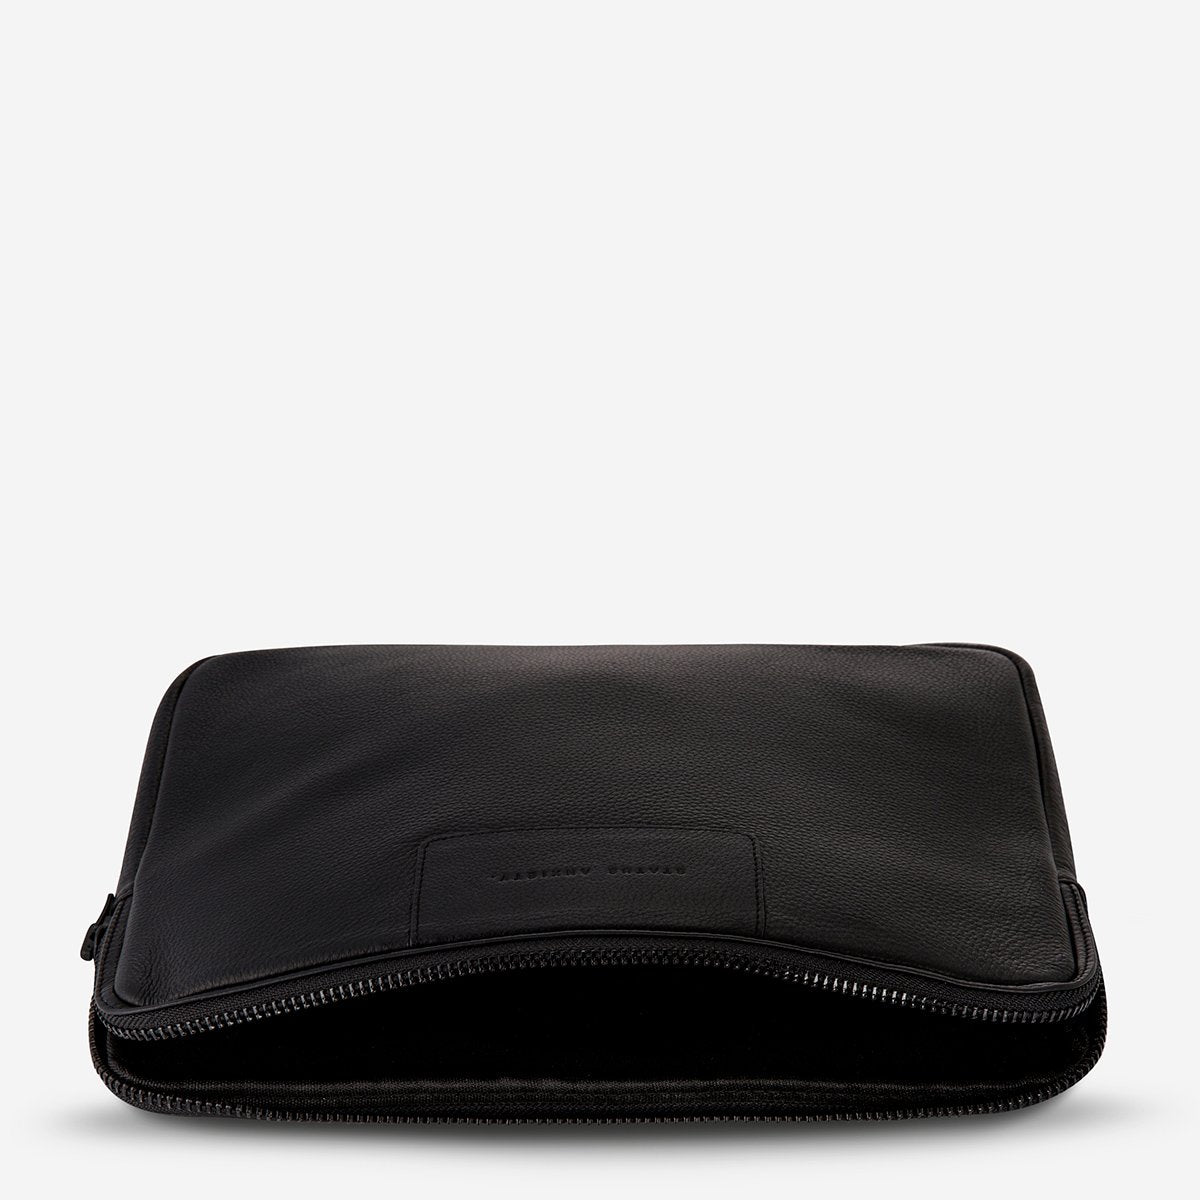 Status Anxiety Laptop Case - Before I Leave - Black